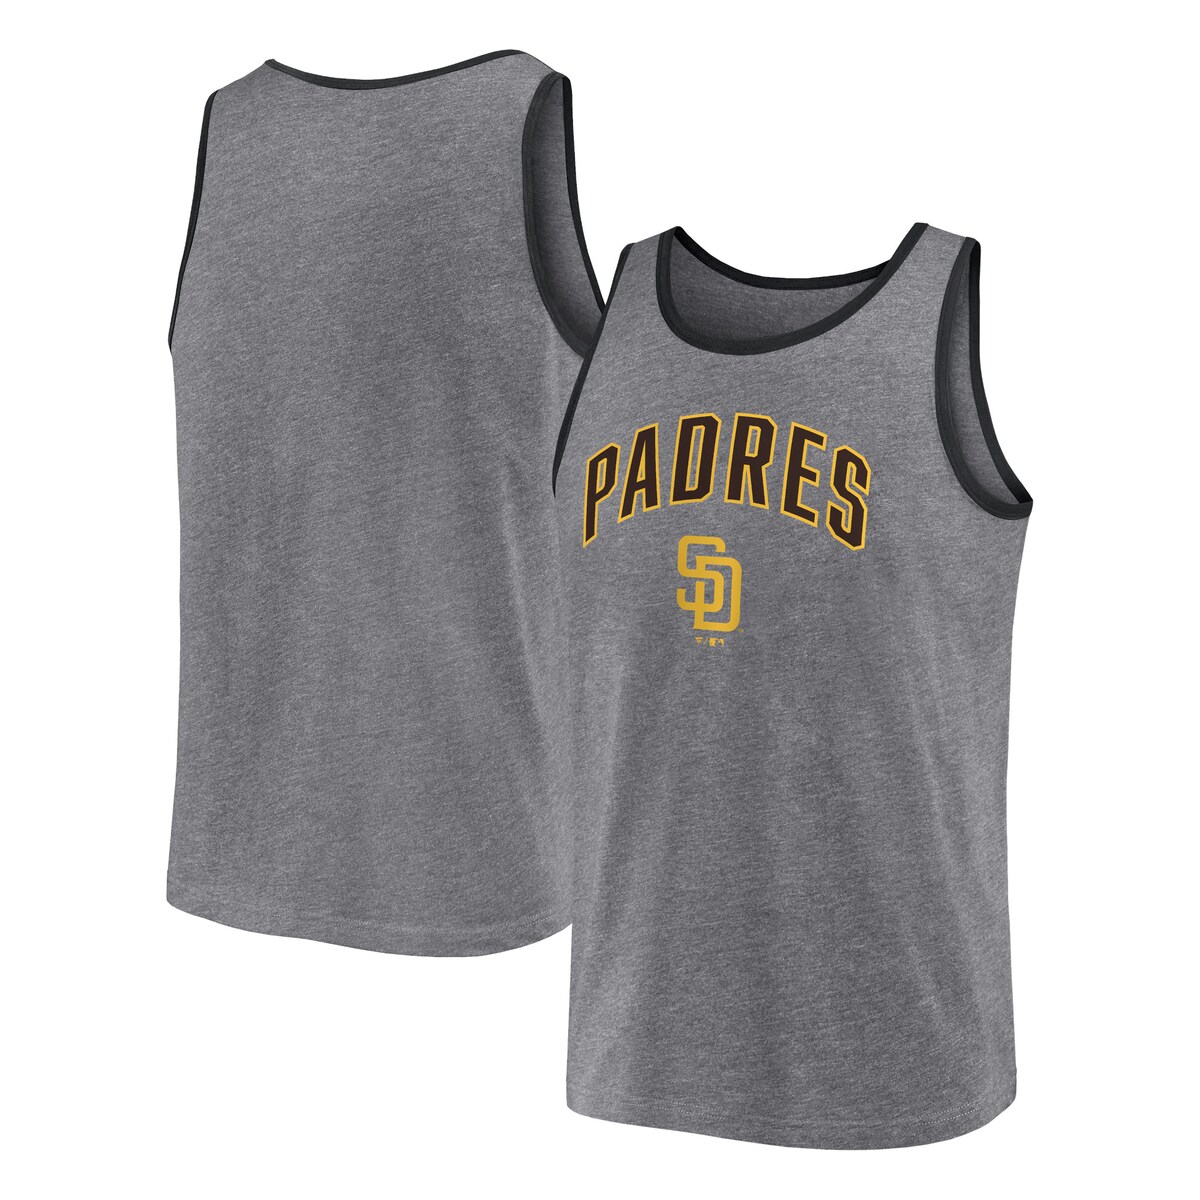 On sunny days, keep cool in this San Diego Padres tank top from Fanatics Branded. Its contrasting team-color trim highlights the primary logo printed across the front. With heathered fabric adding appeal and softness, this top is a go-to on any San Diego Padres game day.Machine wash, tumble dry lowScoop neckMaterial: 50% Cotton/50% PolyesterHeat sealed graphicsImportedOfficially licensedBrand: Fanatics BrandedSleeveless